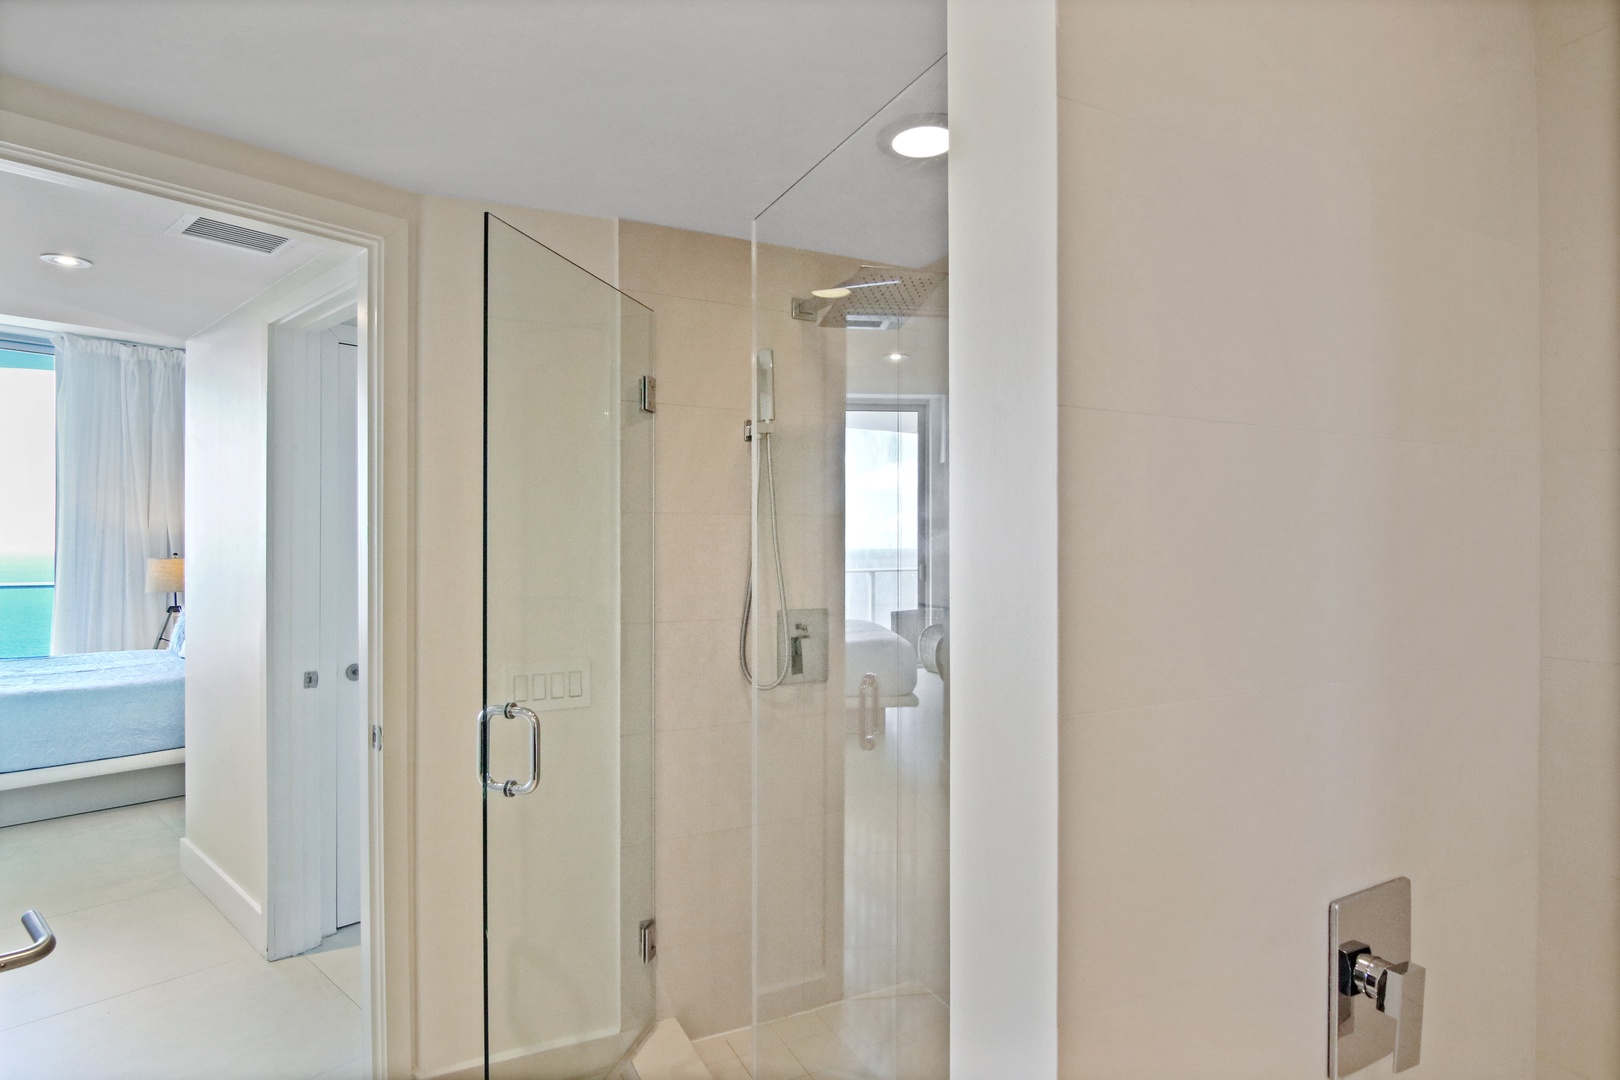 The first king en suite offers a single vanity, glass shower, & soaking tub